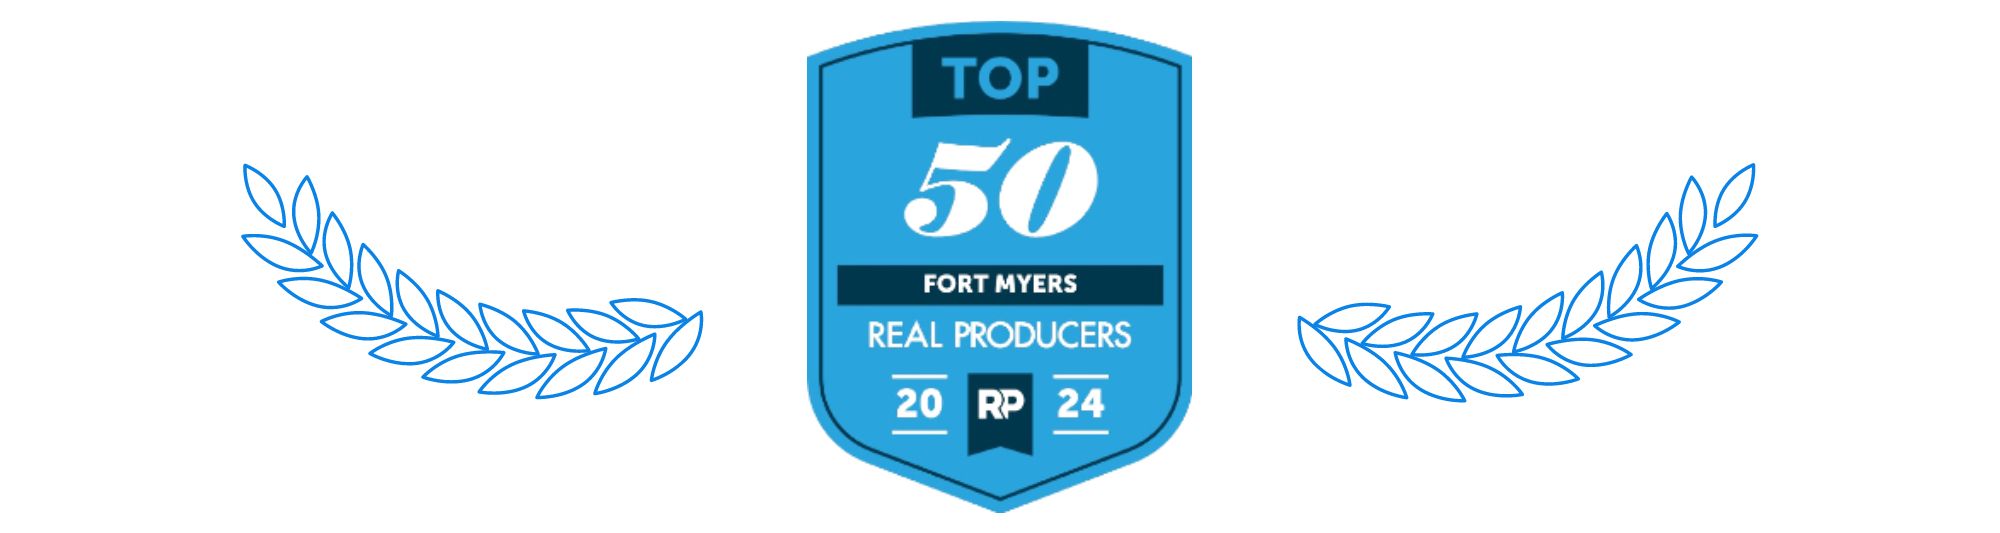 WP Banner for RealProducer's Top 50 Real Producer Award